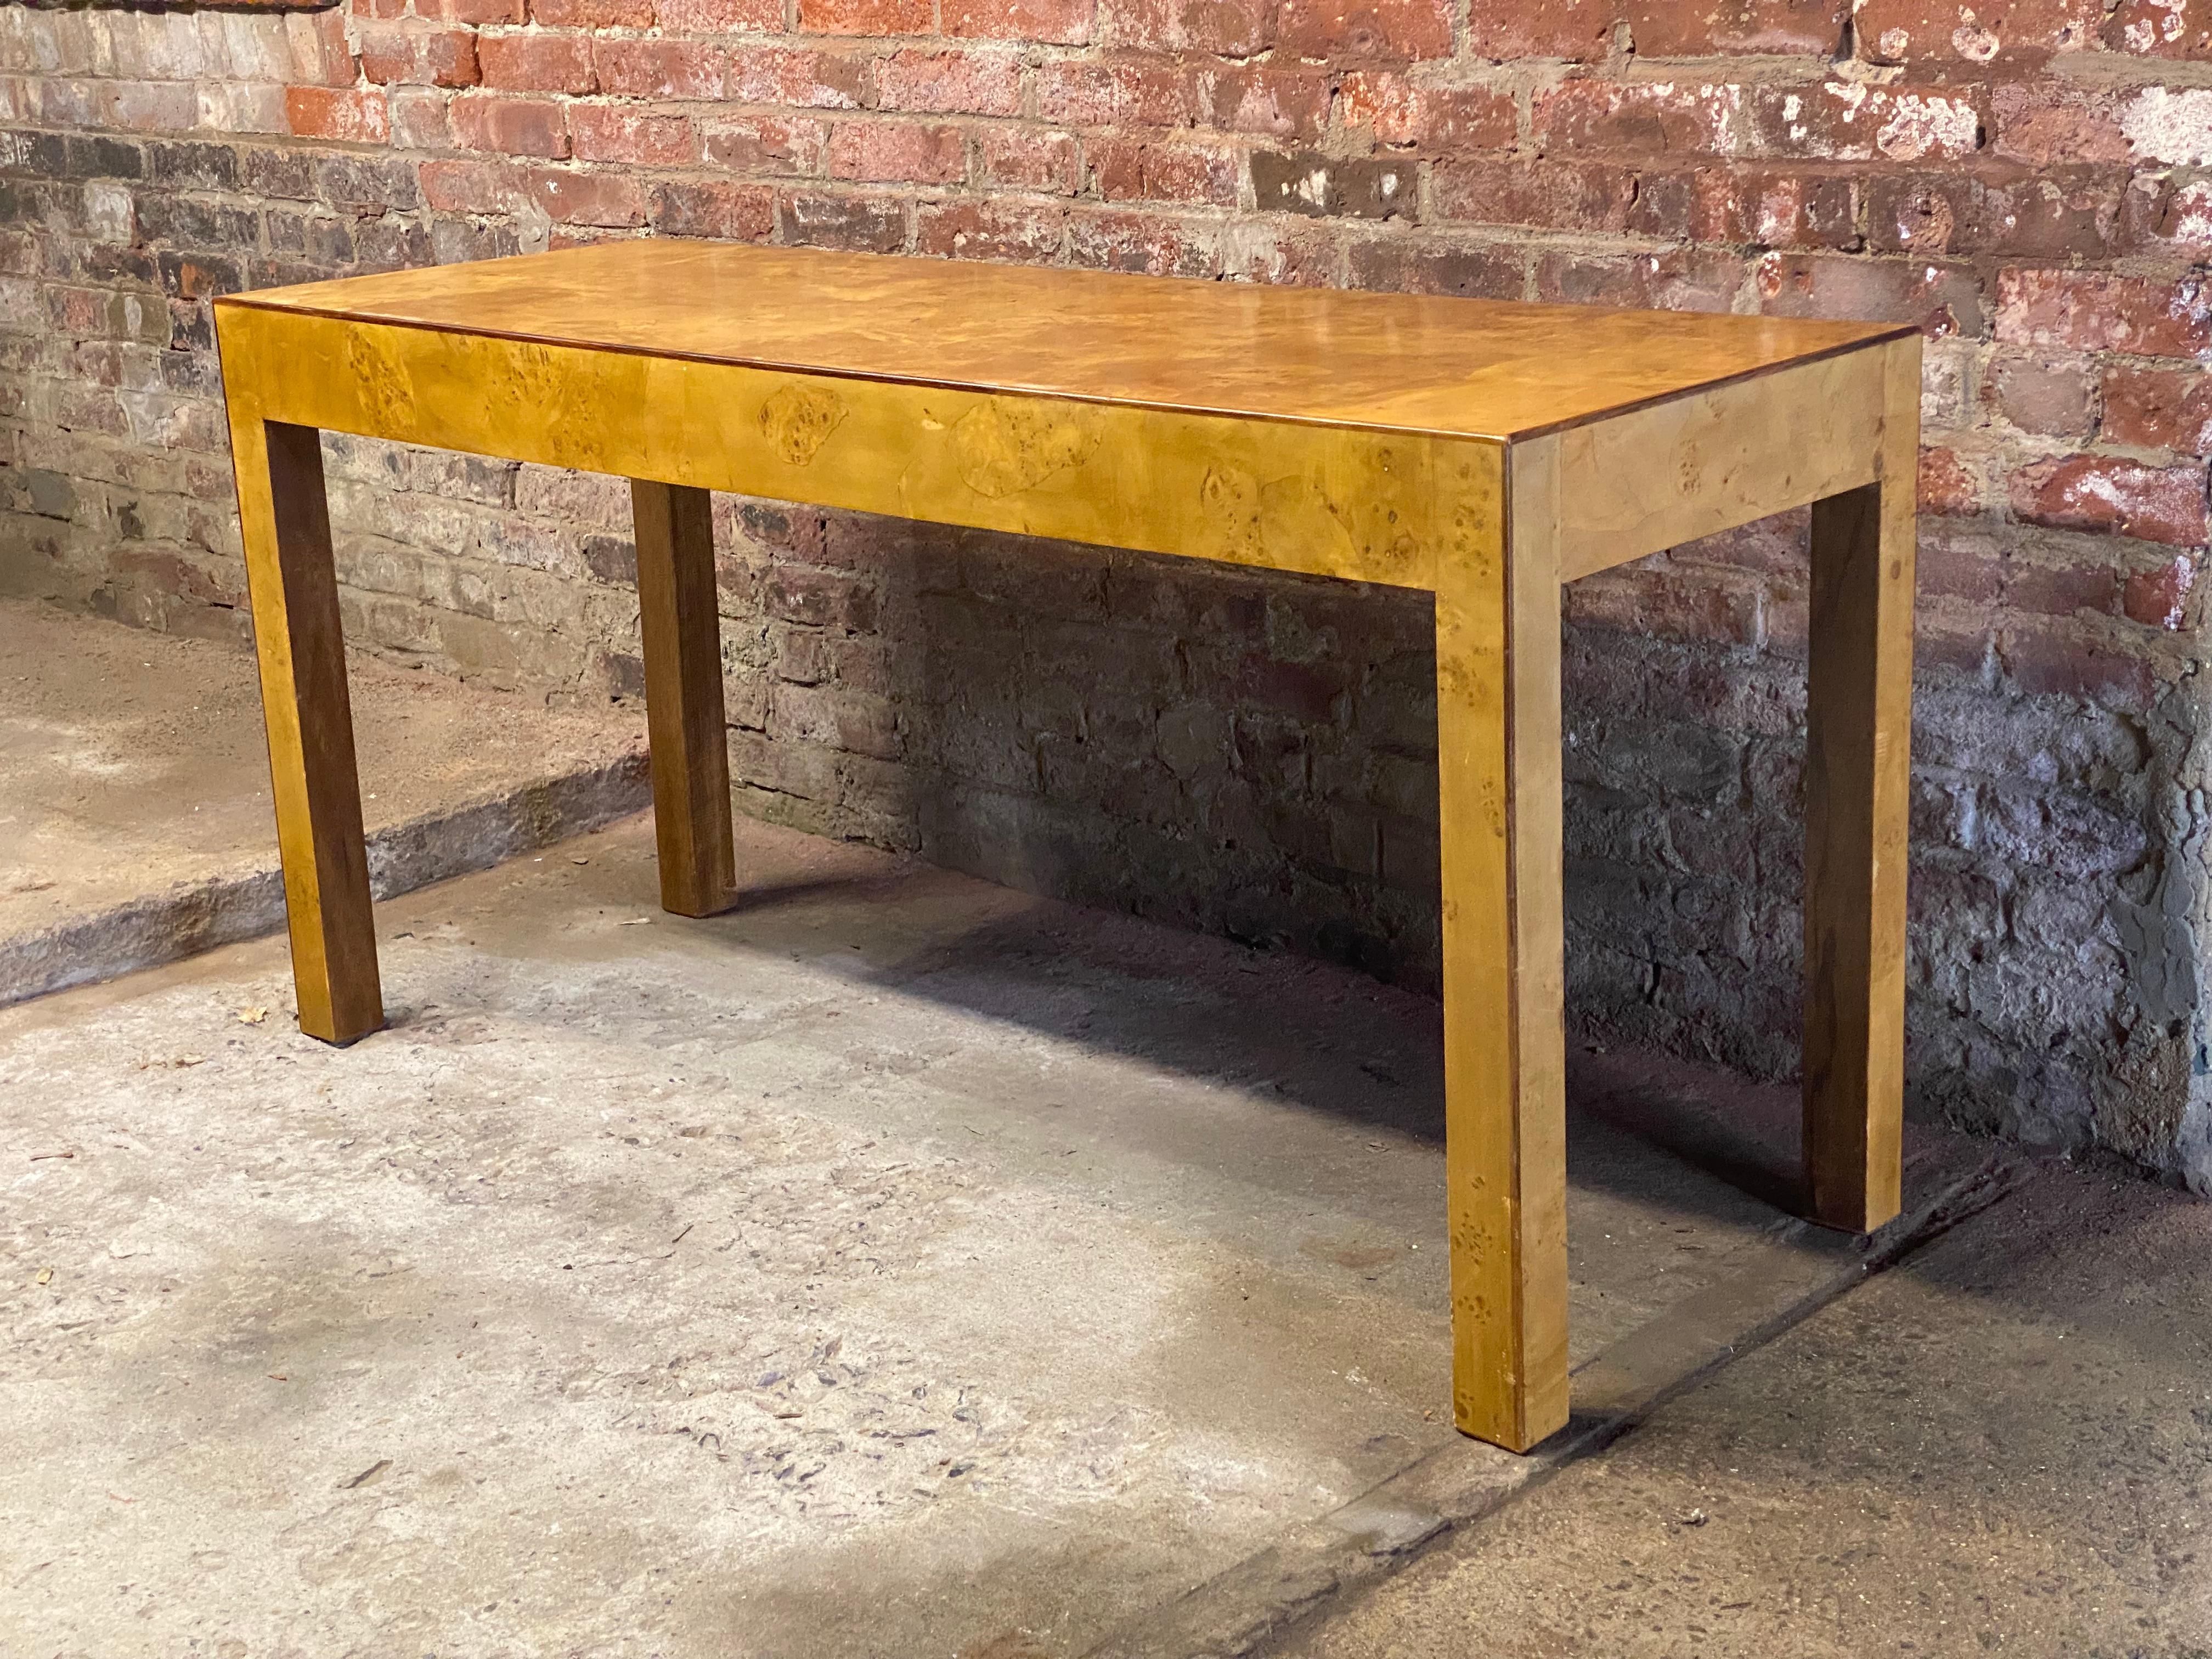 Burlwood with walnut edging 1970s Parsons Table. The classic design can be used as a hall console or sofa table. Knotty burl veneers for an intricate decorative pattern along with the warm dark wood edging along the table top perimeter and legs.